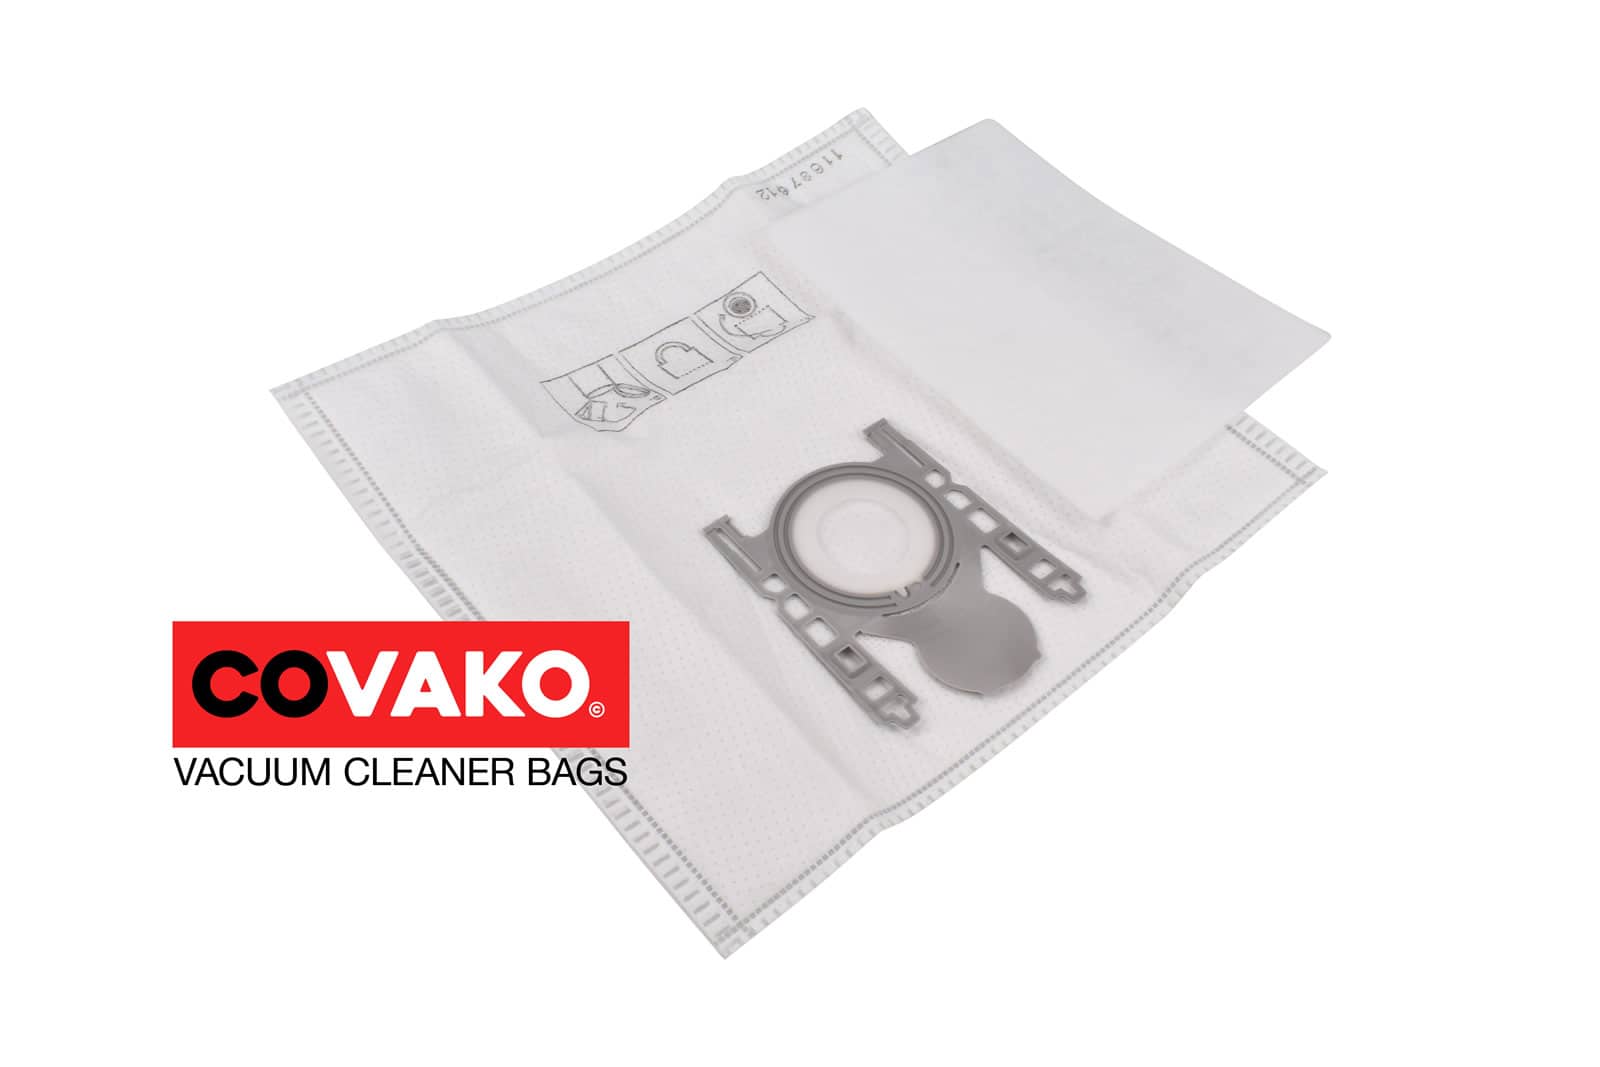 Bosch BBS 6310-6399 / Synthesis - Bosch vacuum cleaner bags